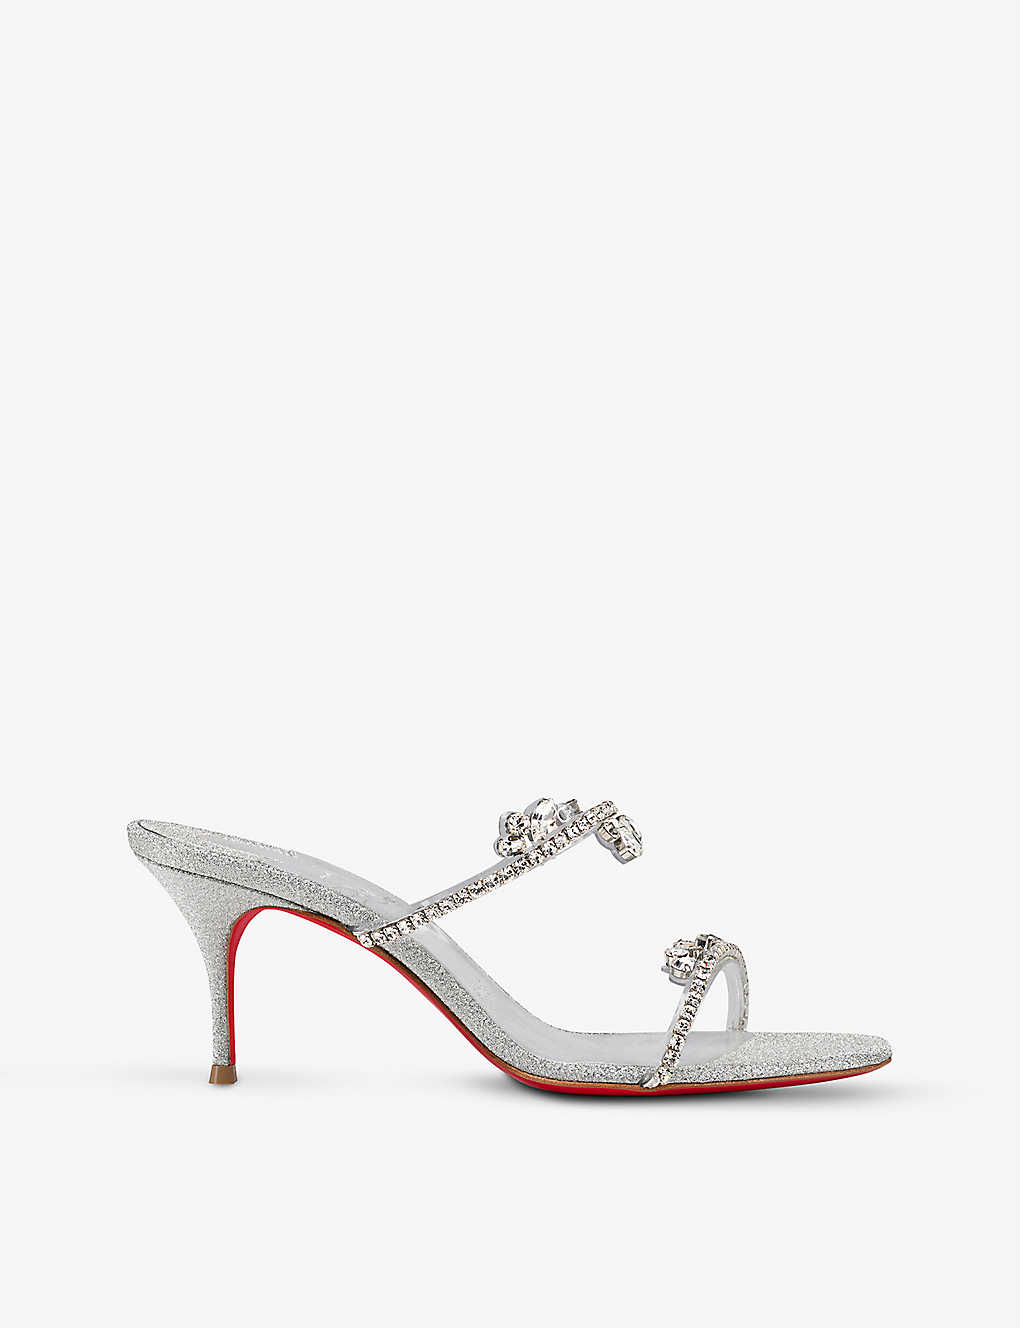 CHRISTIAN LOUBOUTIN CHRISTIAN LOUBOUTIN WOMENS SILVER/CRY/LIN JUST QUEEN 70 LEATHER AND PVC HEELED SANDALS,62704961